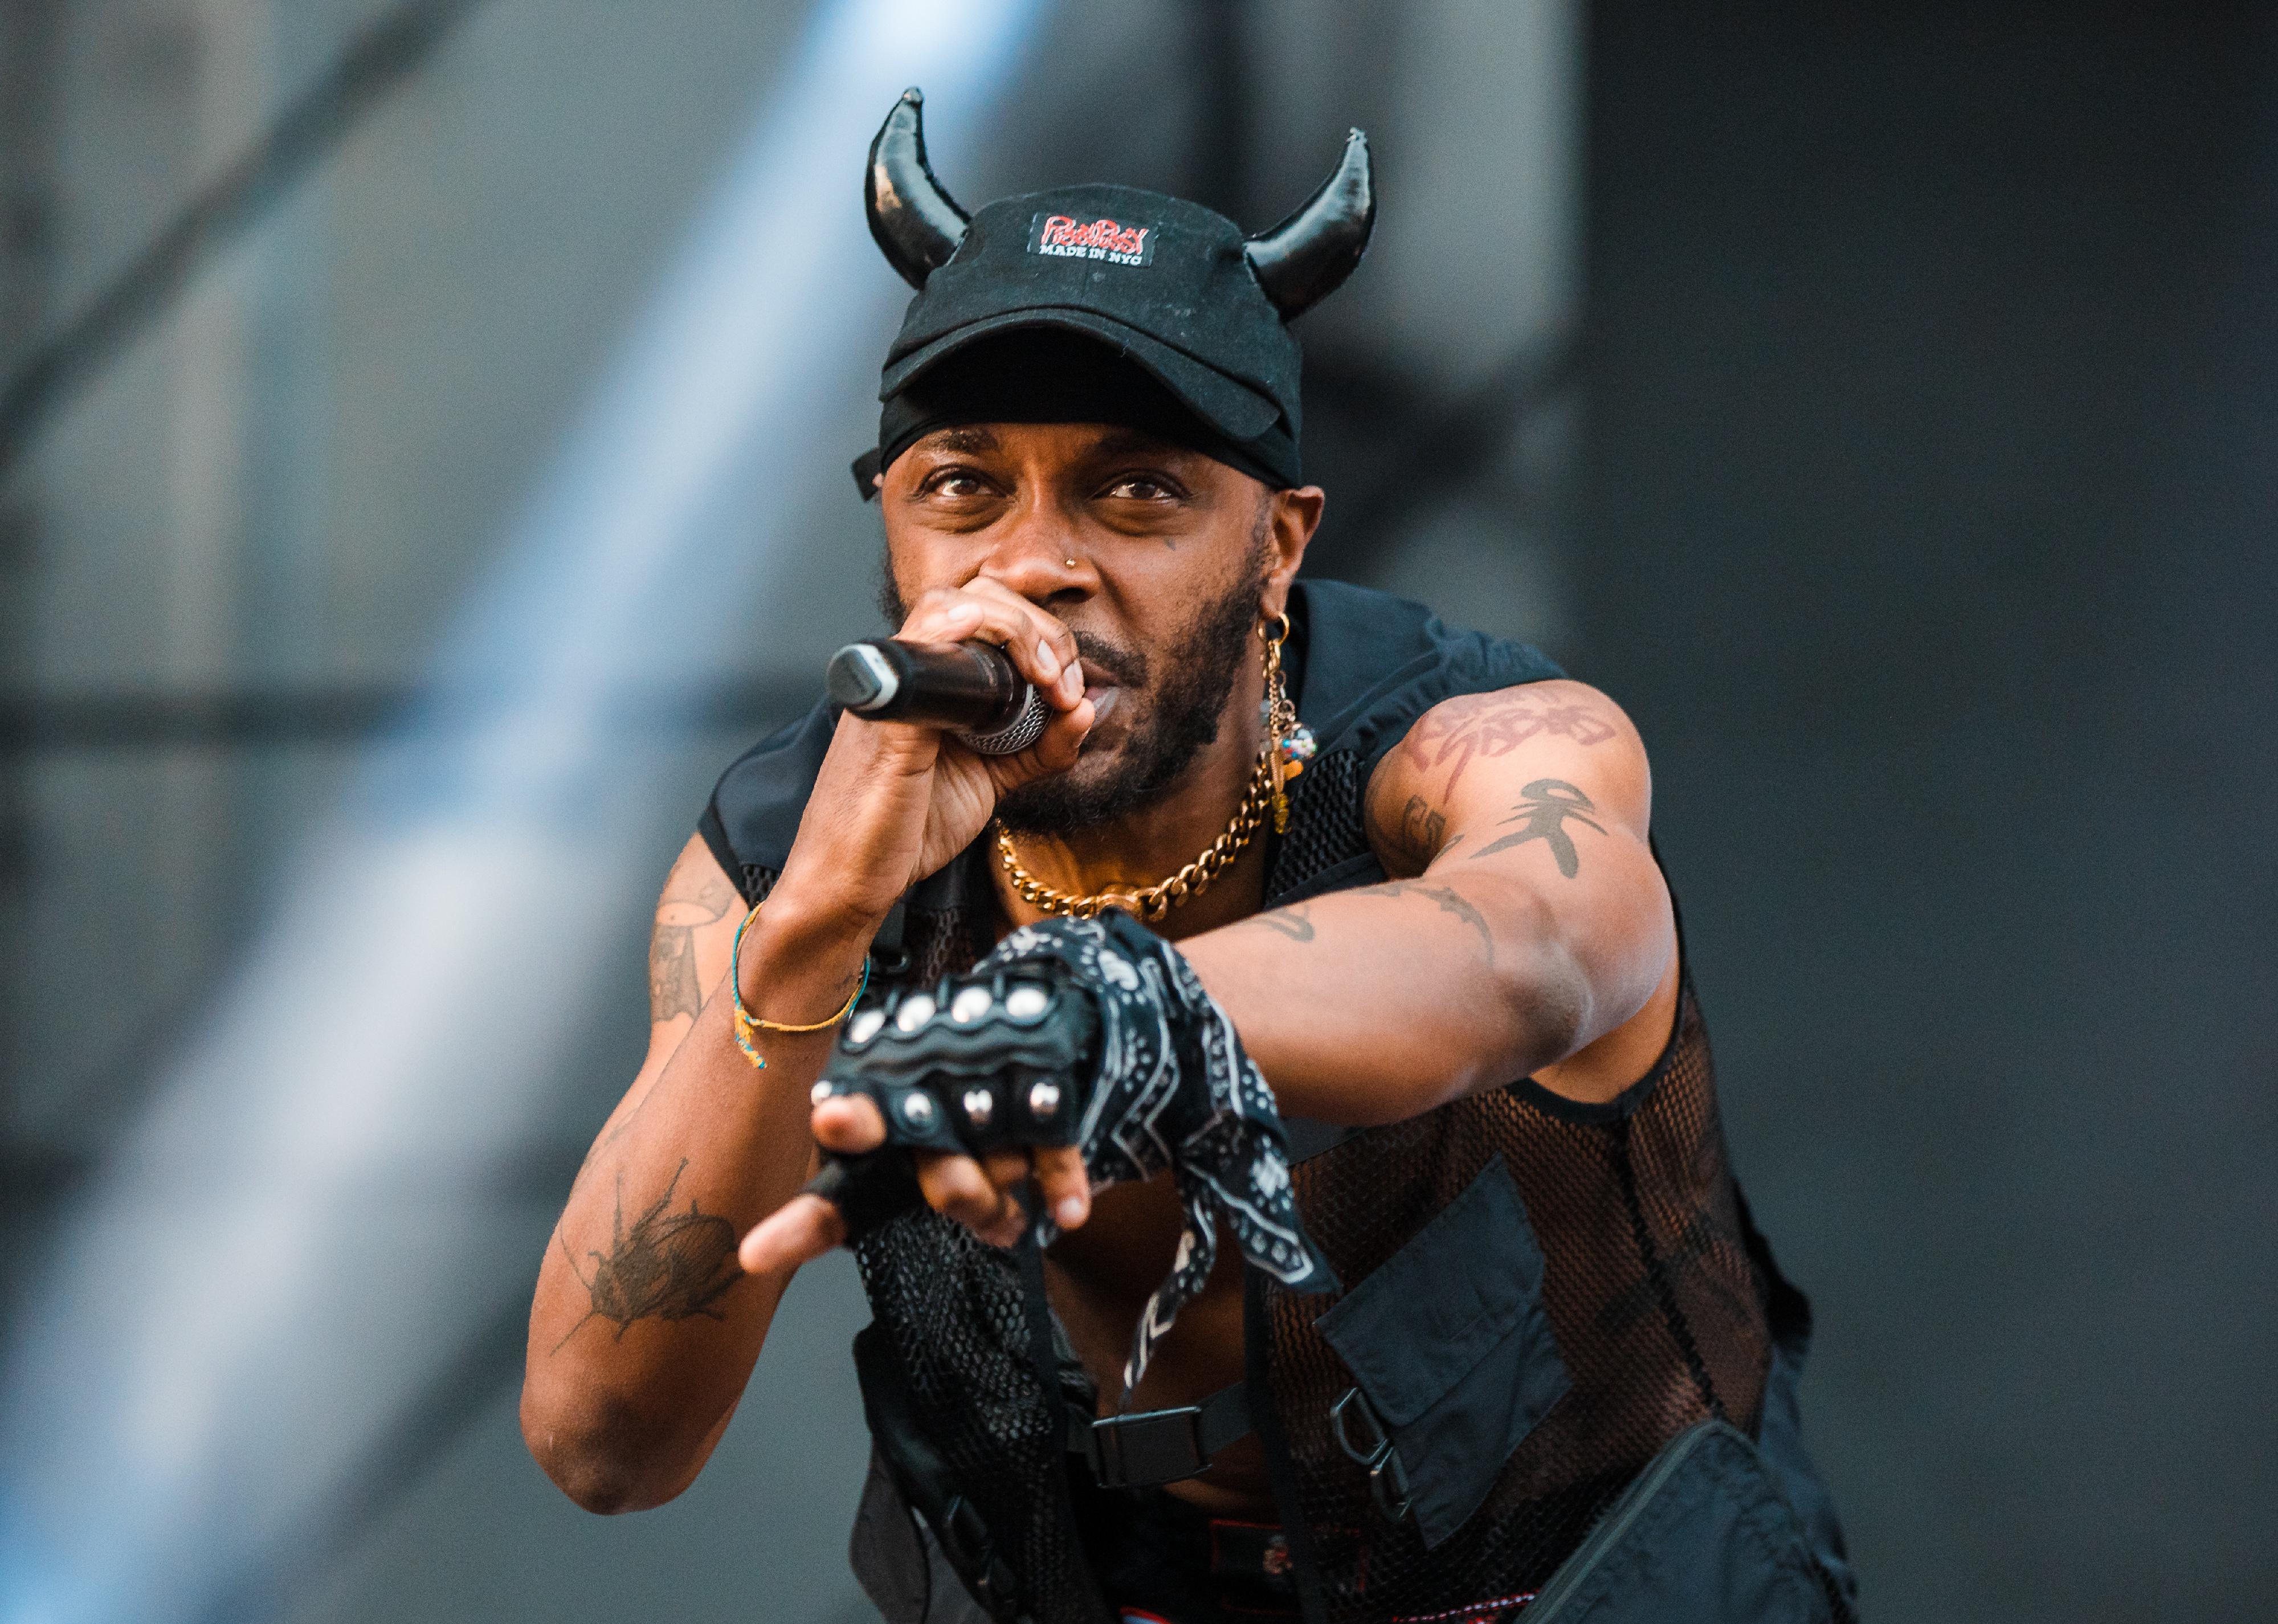 JPEGMAFIA performs onstage in a black hat with horns.